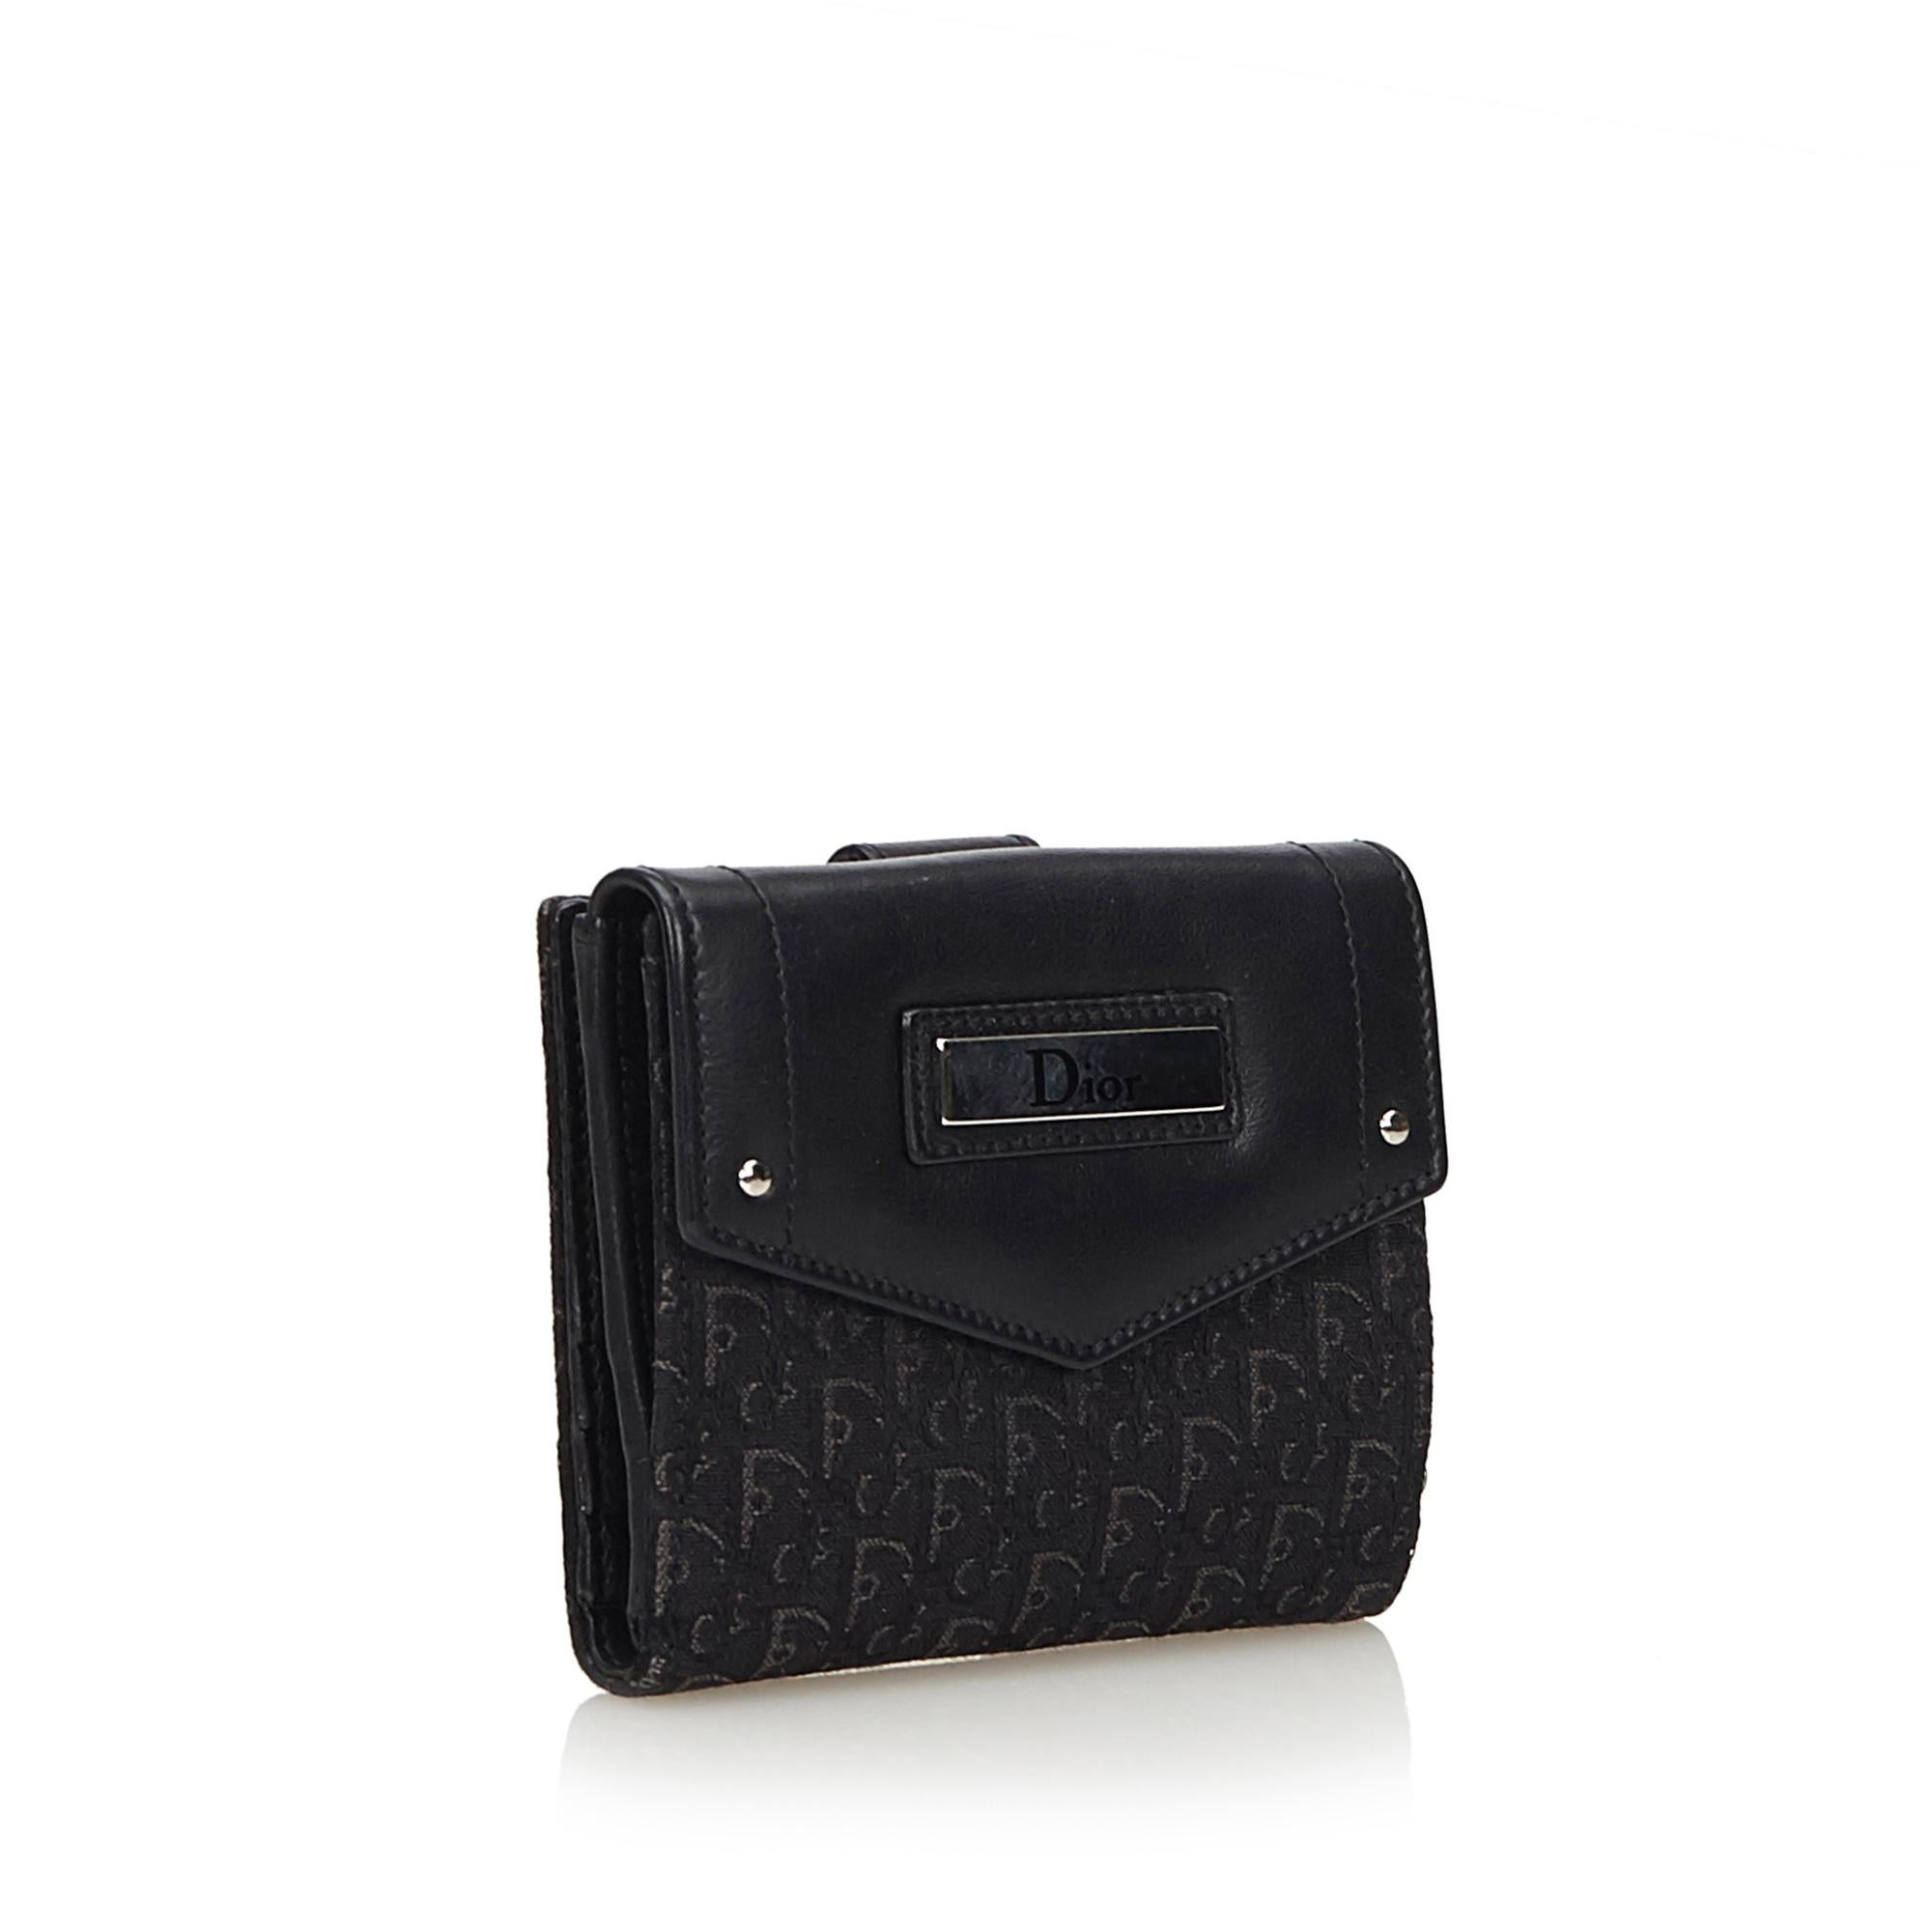 This oblique small wallet features a jacquard body with leather detail and interior slip pockets. It carries as B+ condition rating.

Inclusions: 
Dust Bag

Dimensions:
Length: 10.50 cm
Width: 9.50 cm
Depth: 2.50 cm

Material: Fabric x Jacquard x